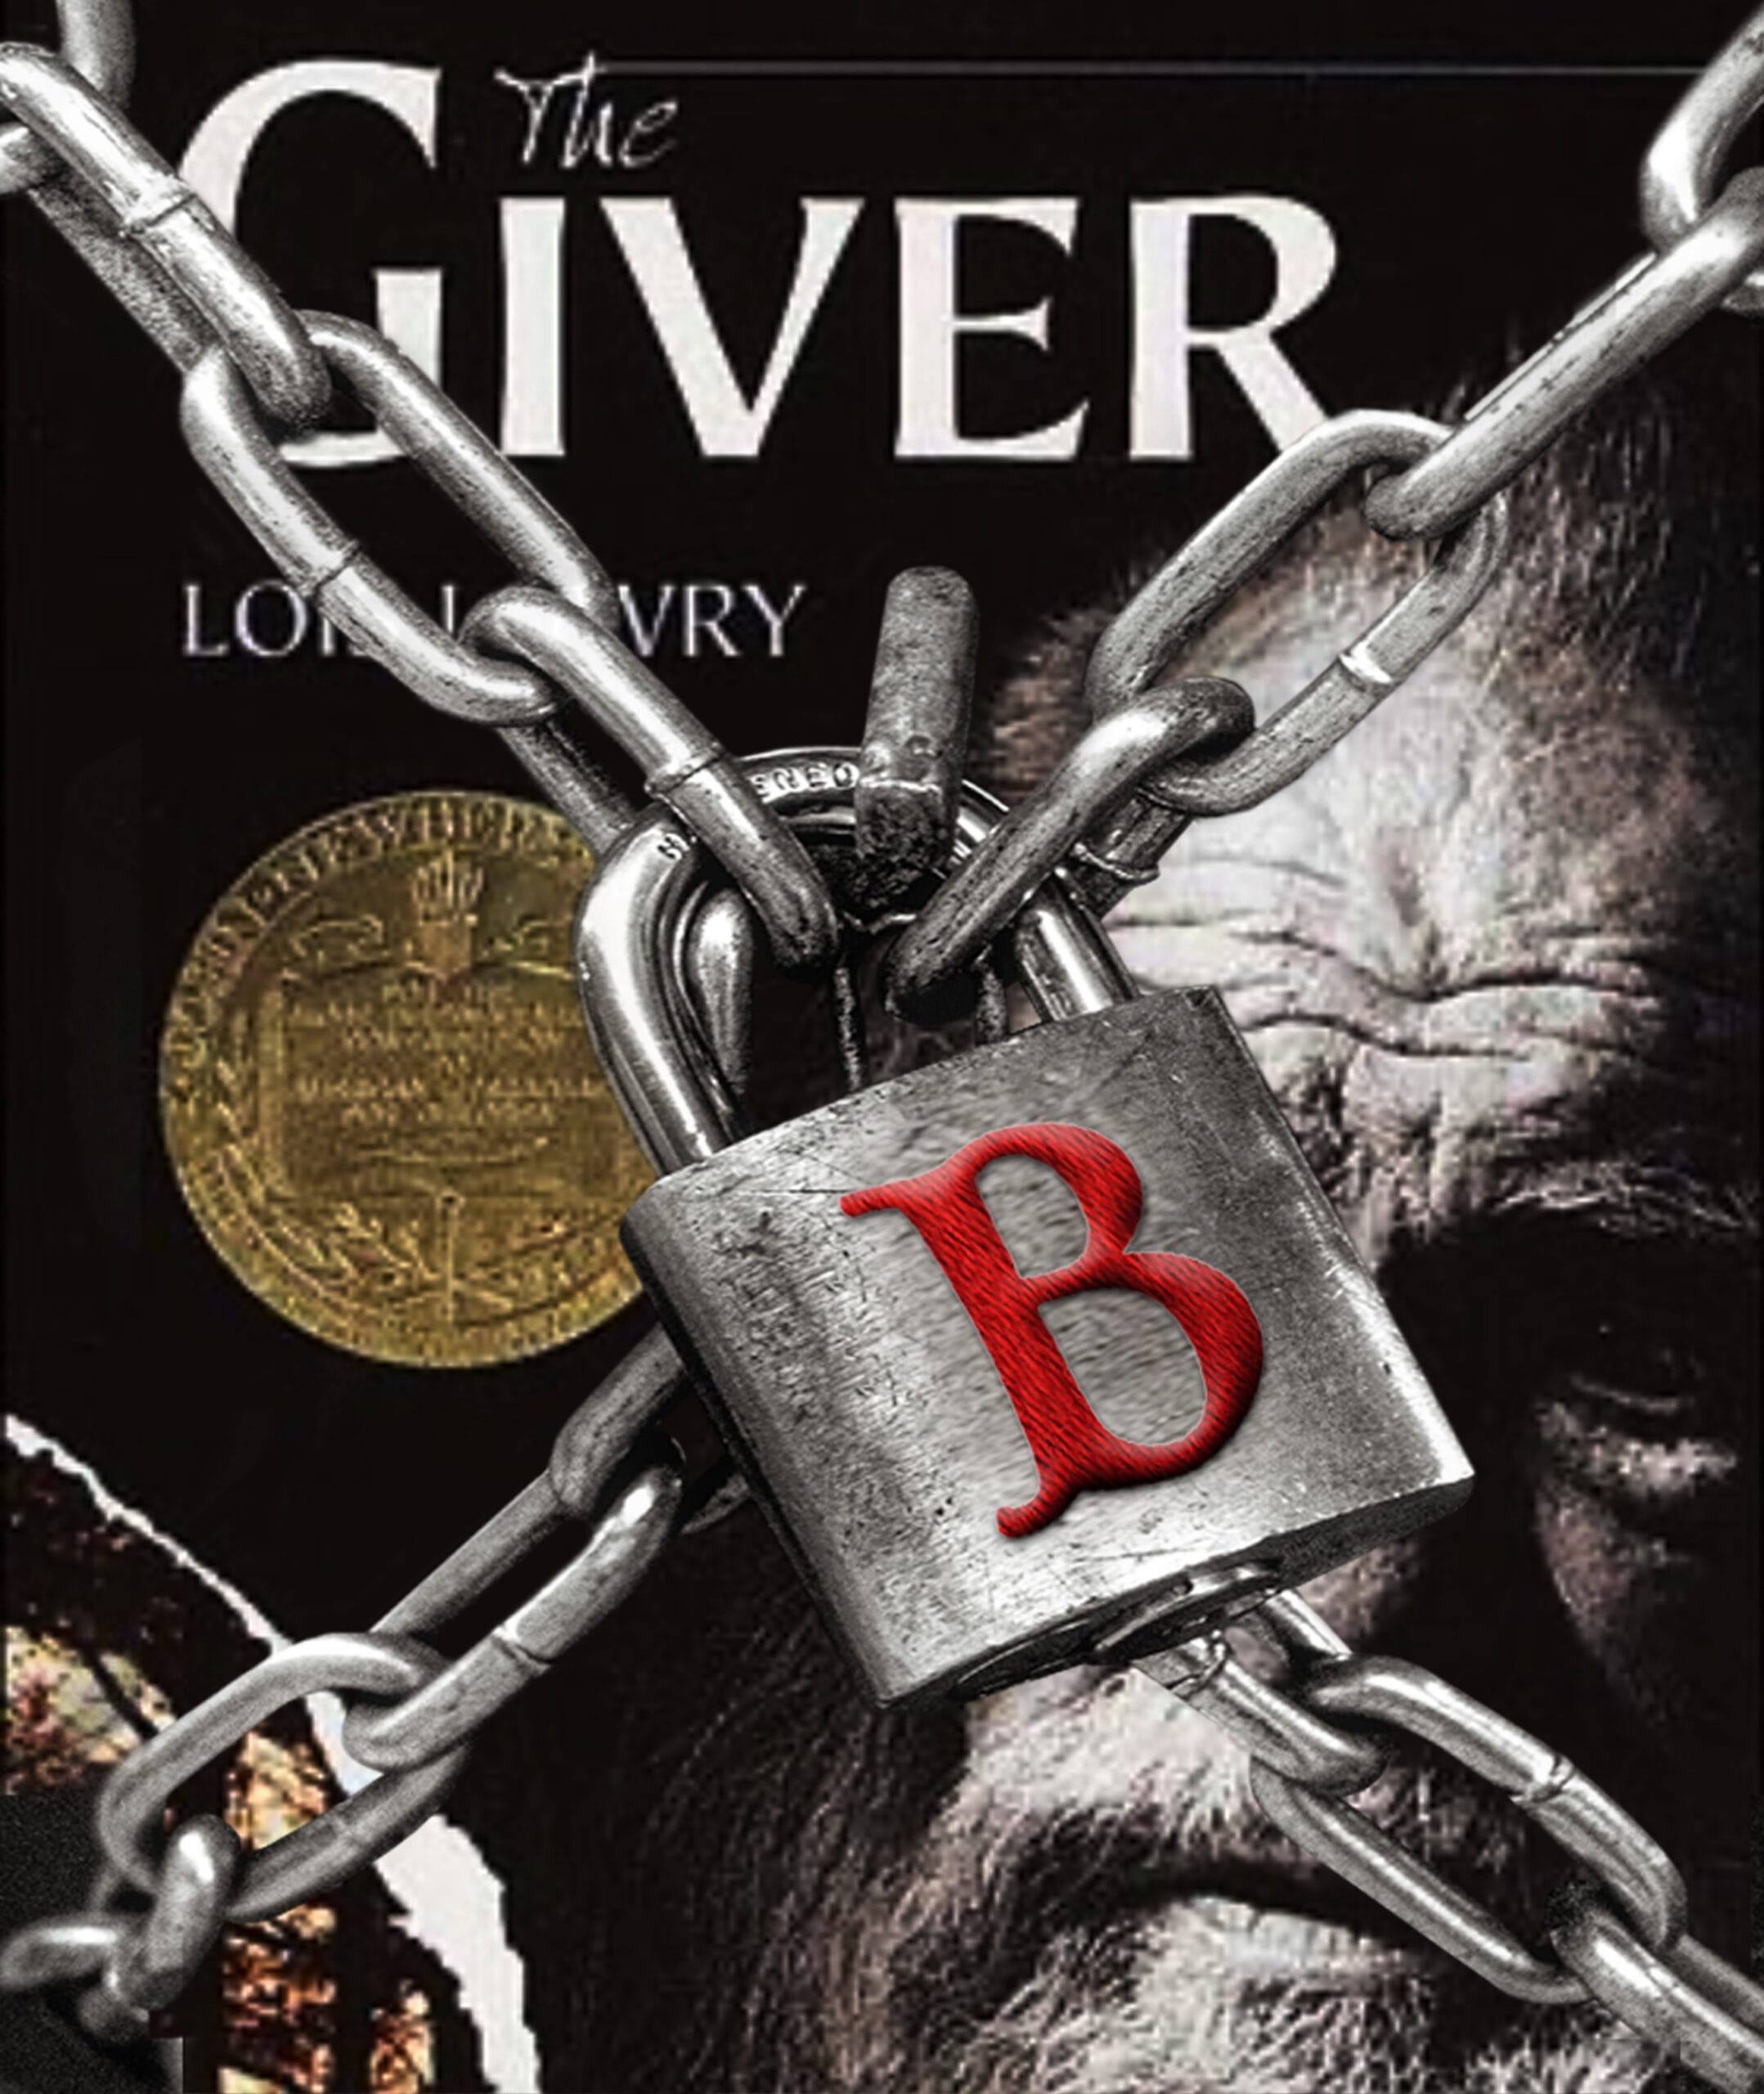 The Giver banned